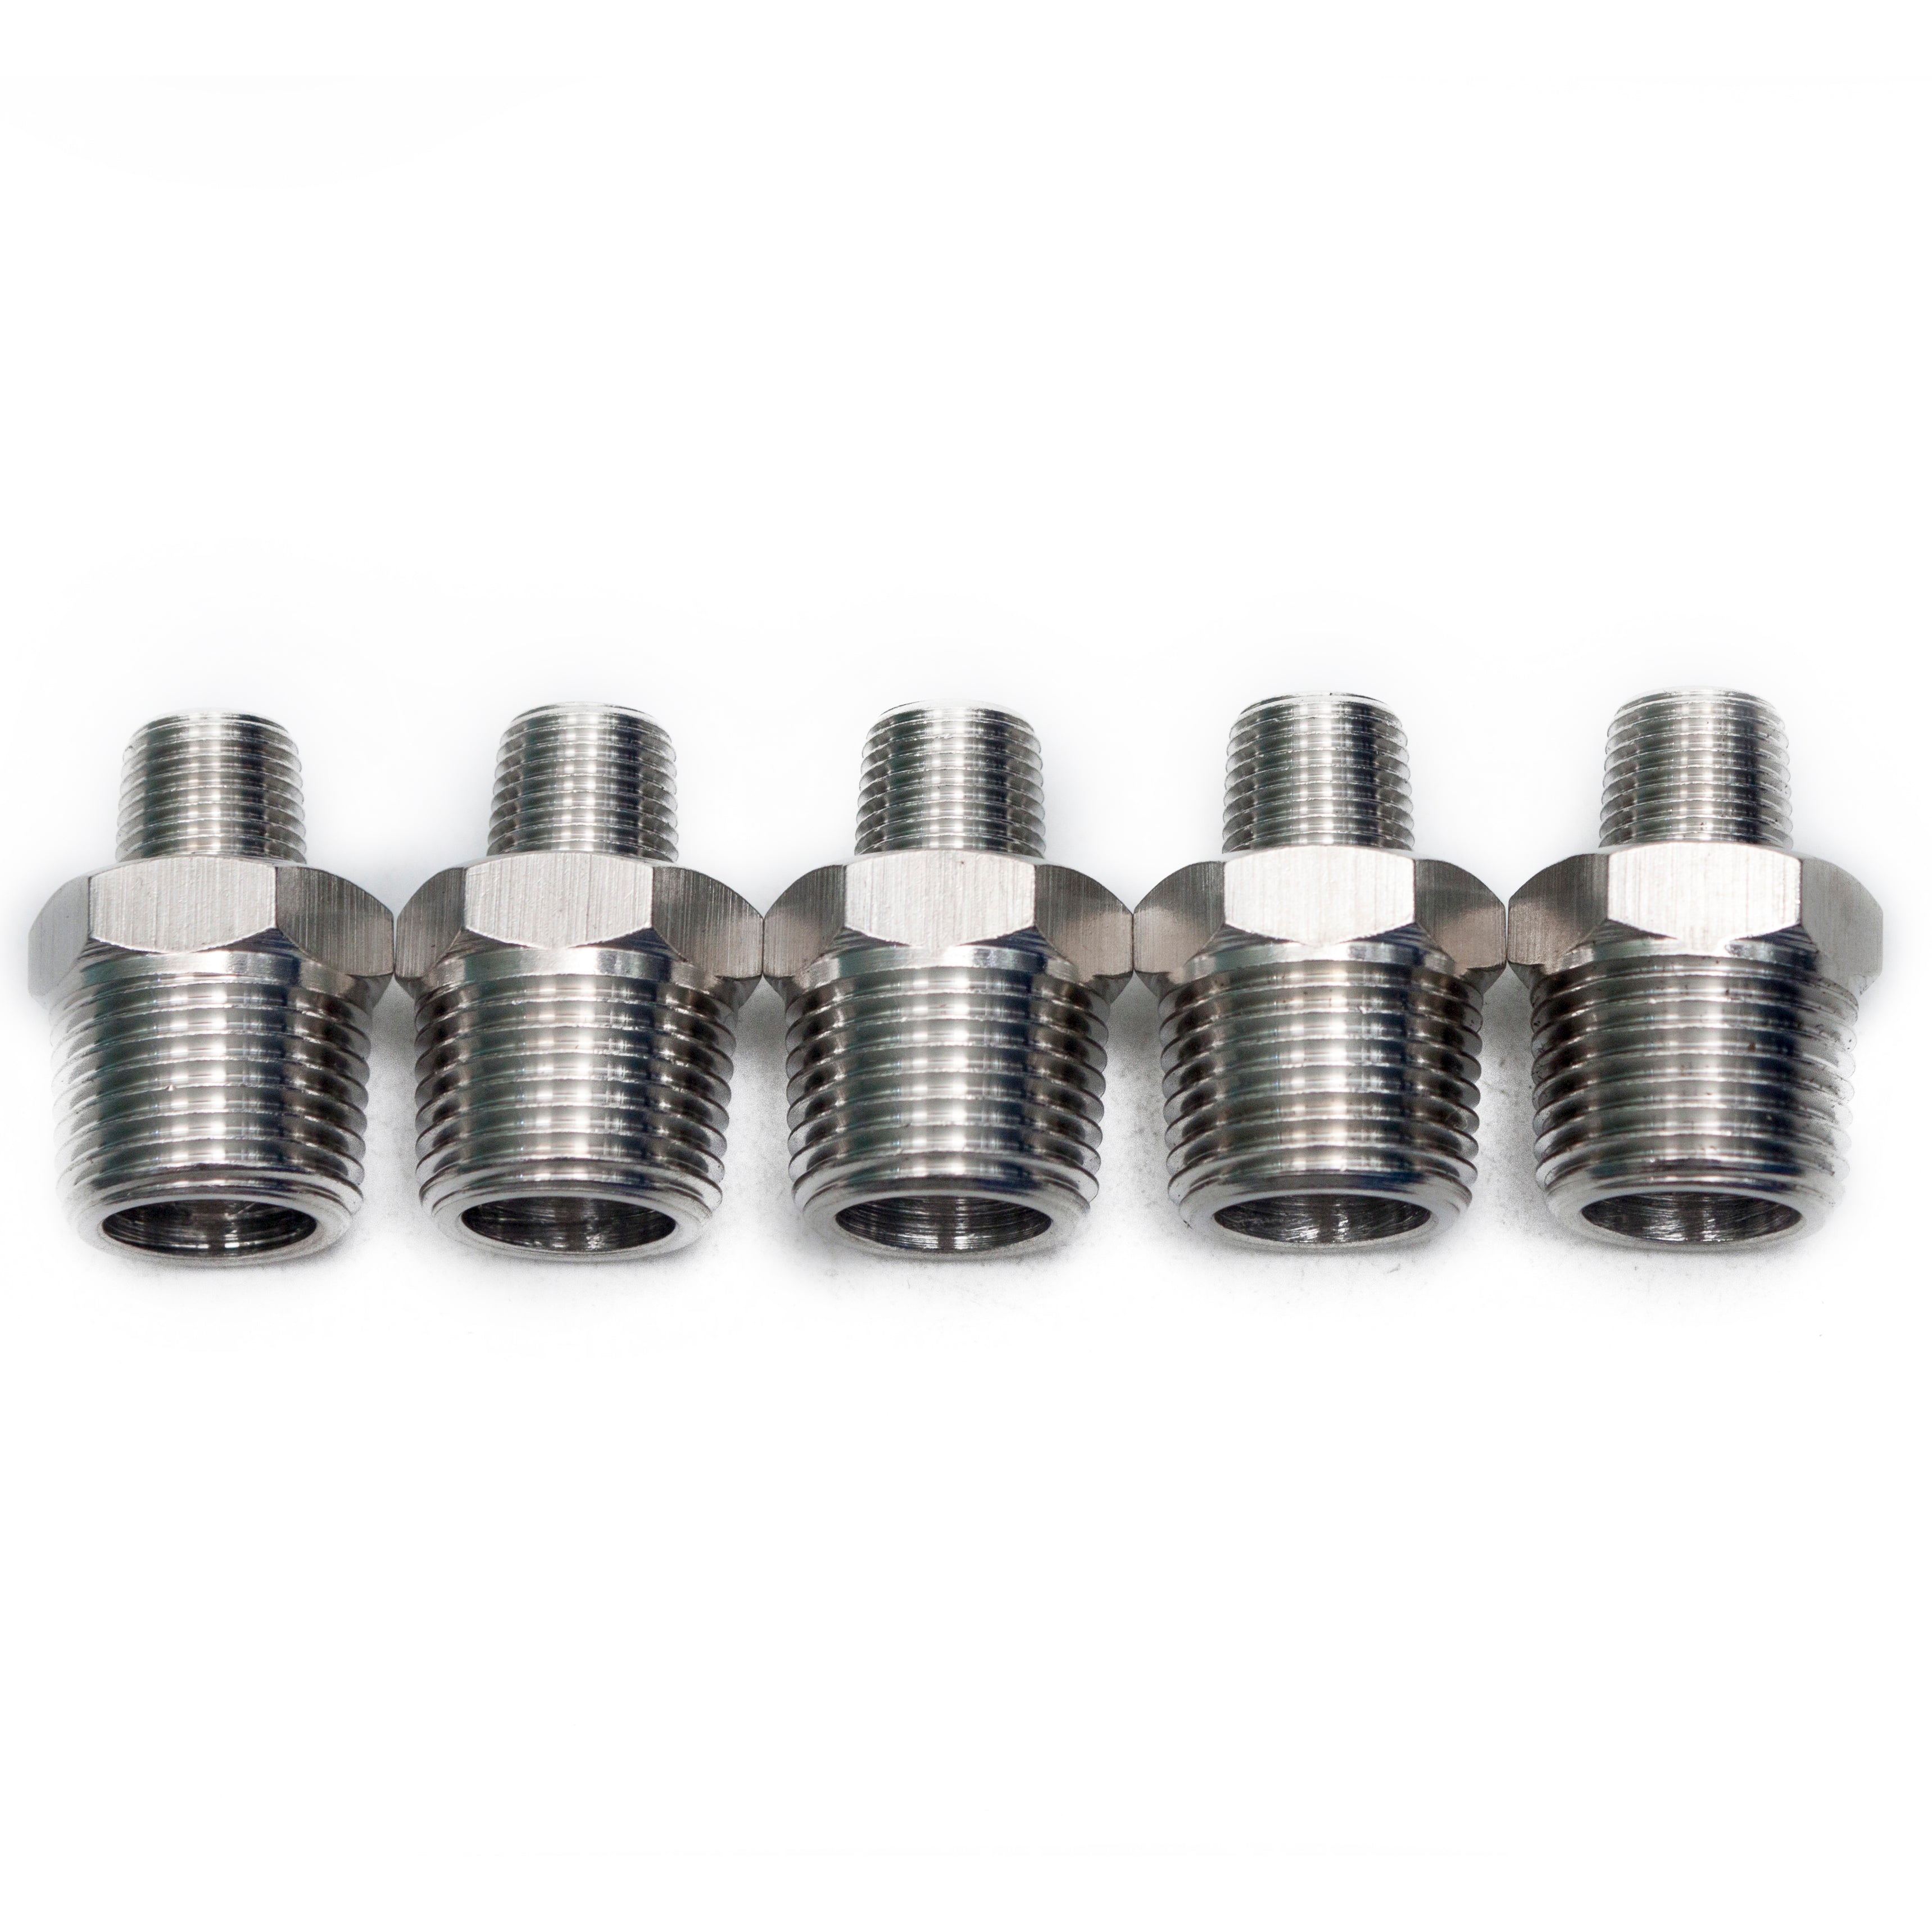 LTWFITTING Bar Production Stainless Steel 316 Pipe Hex Reducing Nipple Fitting 3/8 Inch x 1/8 Inch Male NPT Water Boat (Pack of 5)